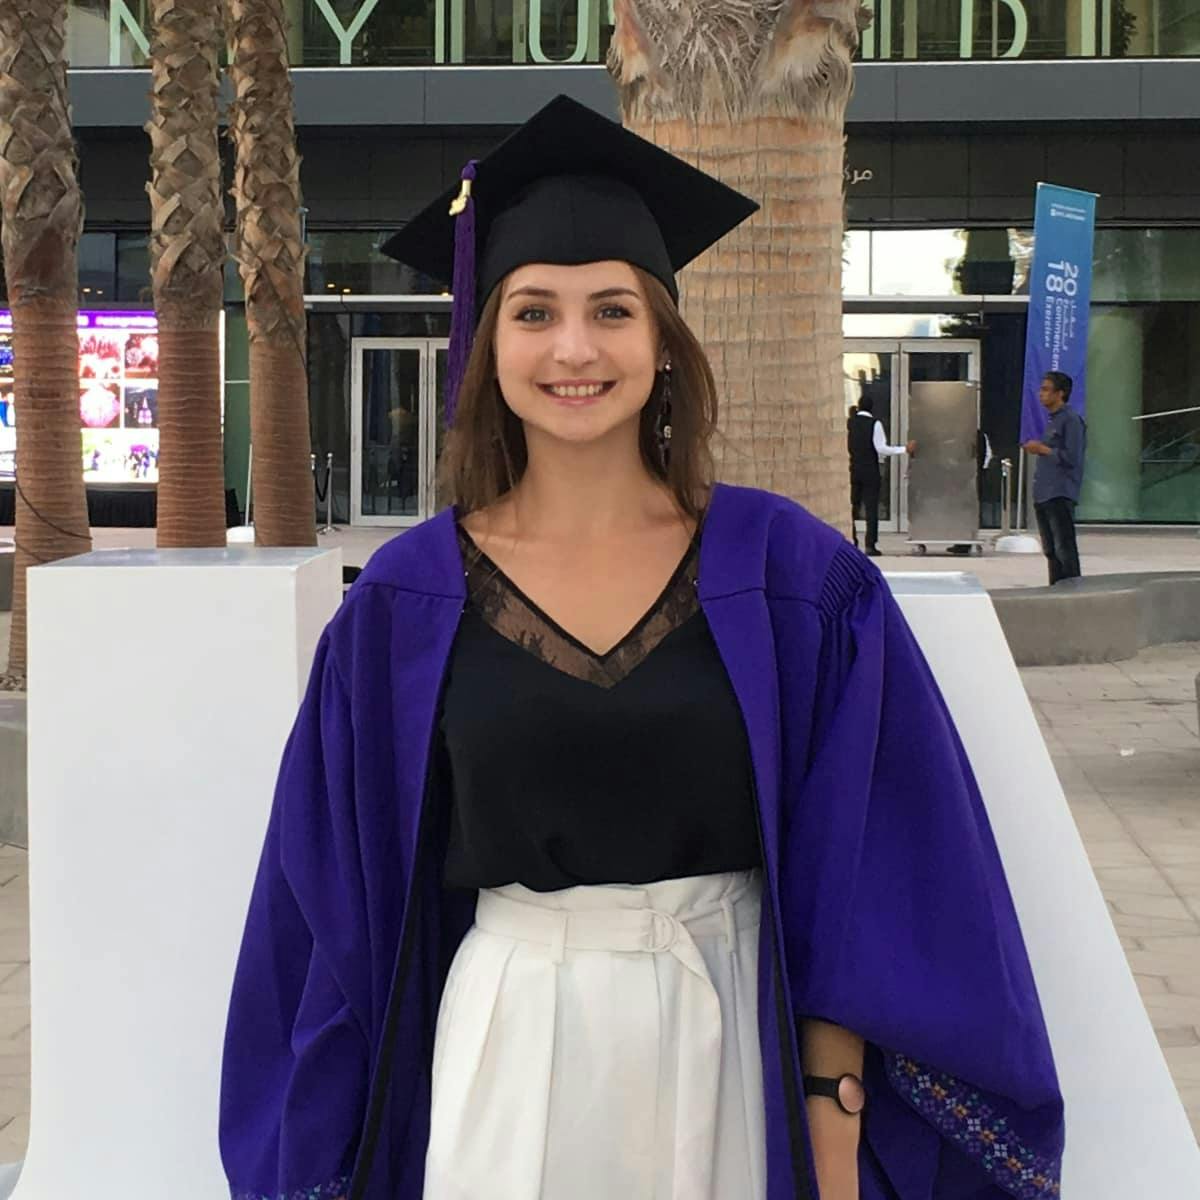 Reflections on the NYU Abu Dhabi experience: application hurdles, traveling and post-grad opportunities